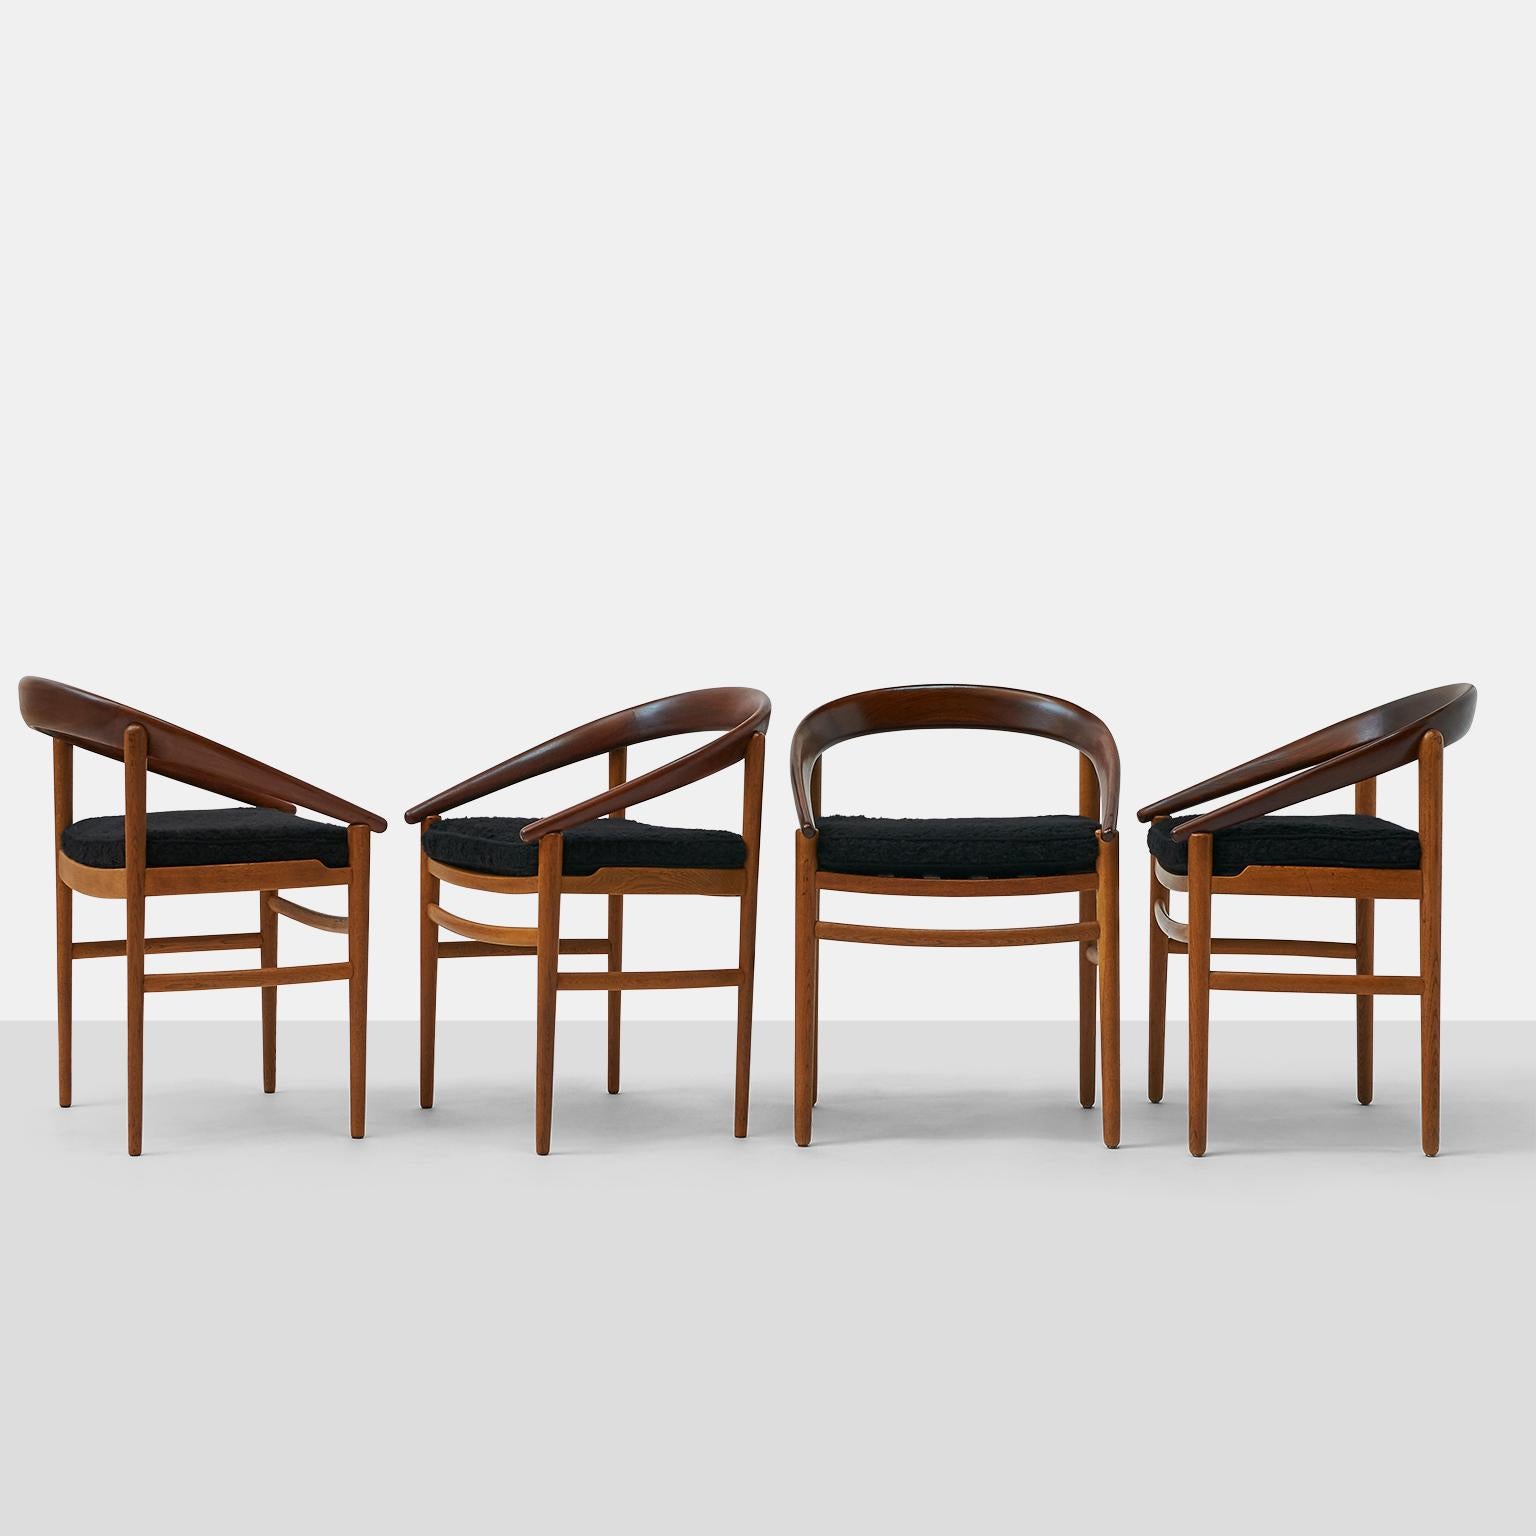 A set of 4 barrel back armchairs by Brockmann Petersen for Poul Jeppesen with two-toned, walnut continuous backs and ash frames. Chairs are marked Model 123 Denmark.

The frames have been lightly restored and new webbing on the seat. New seat